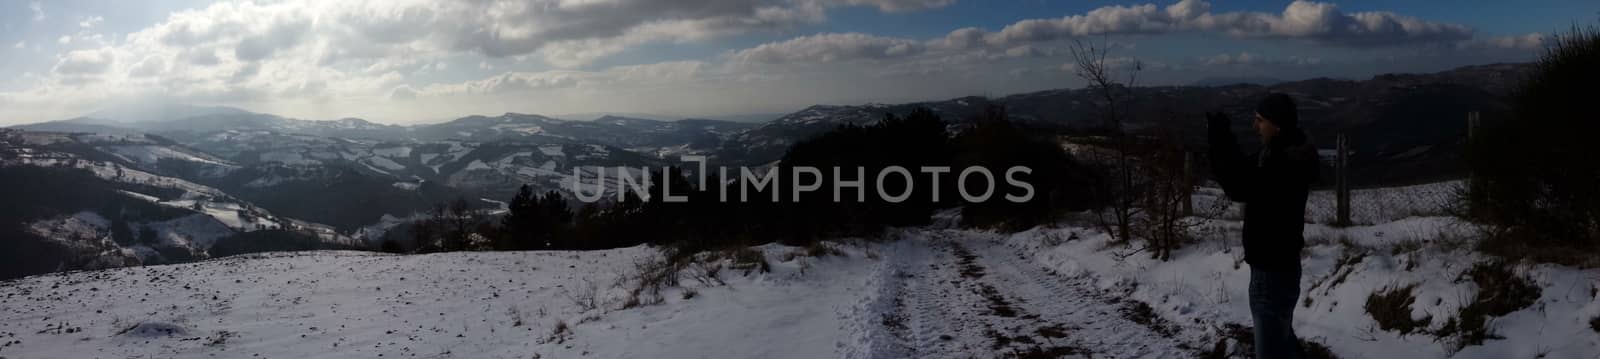 The countryside of Umbria near to Gubbio under the snow during the Winter - Beautiful landscape covered by snow in a sunny day